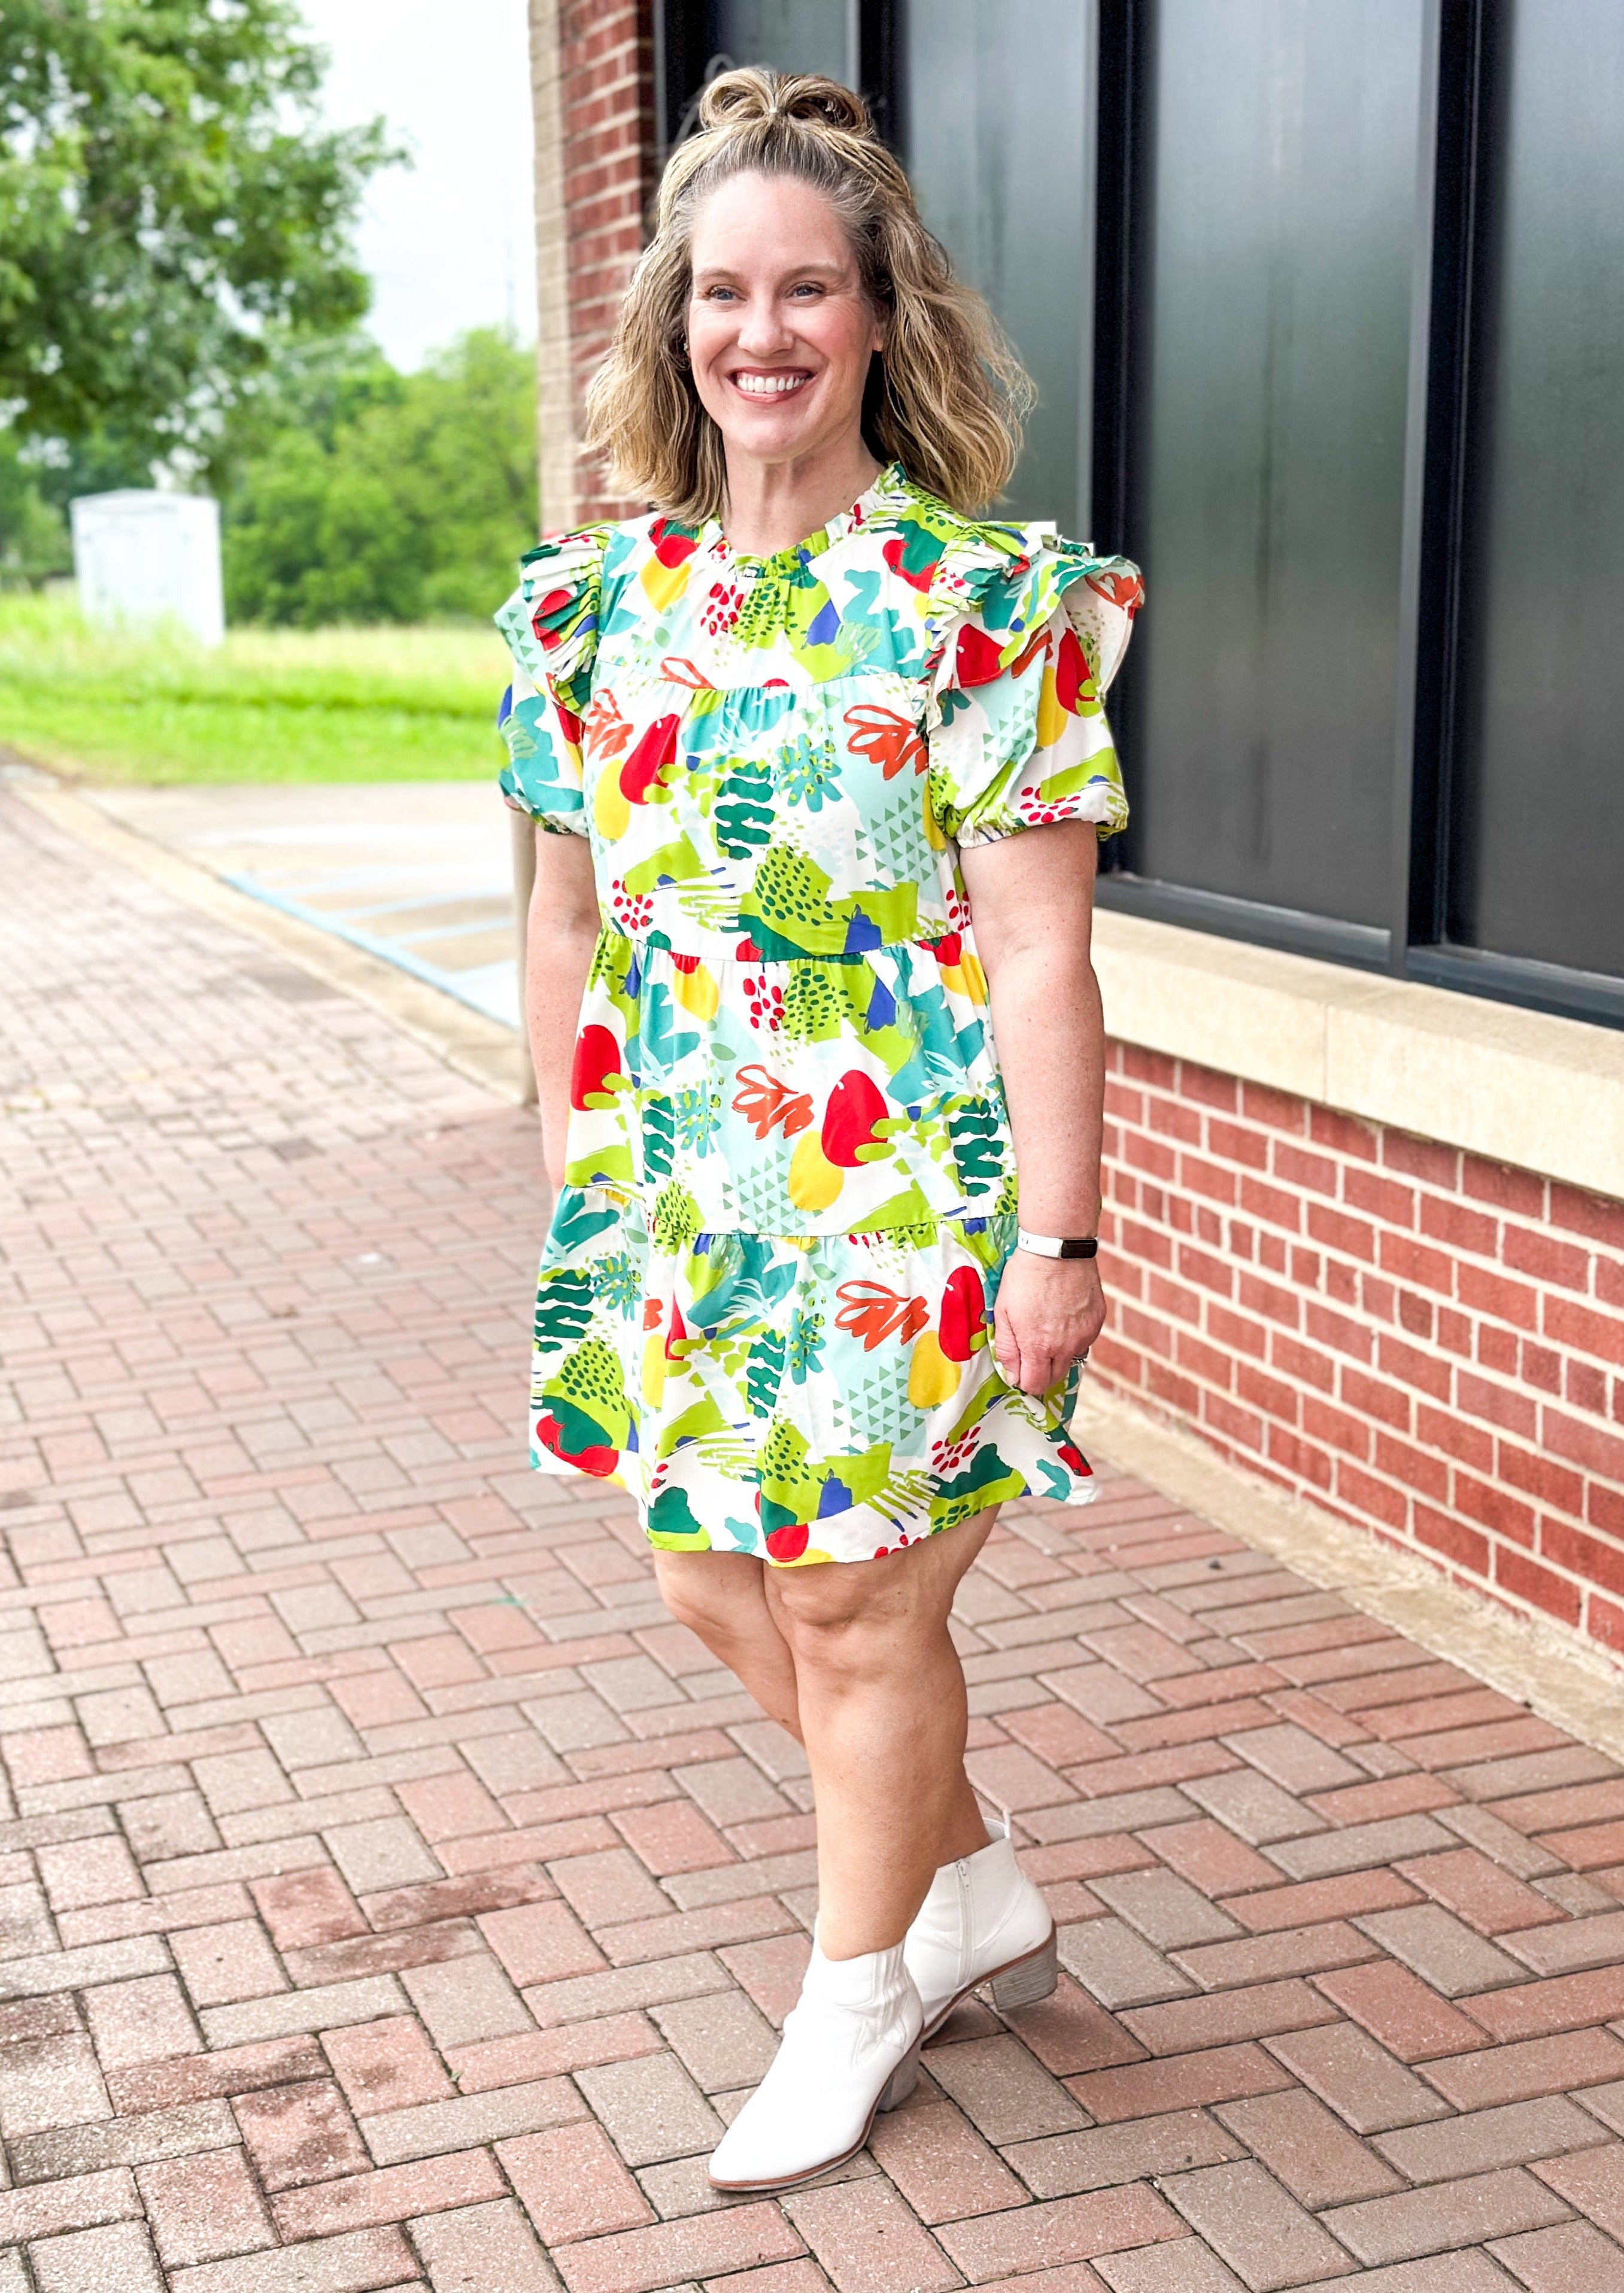 Greens, red, yellow, teal abstract print on white background dress - ruffle neck and ruffle on shoulder of short balloon sleeve - tiered